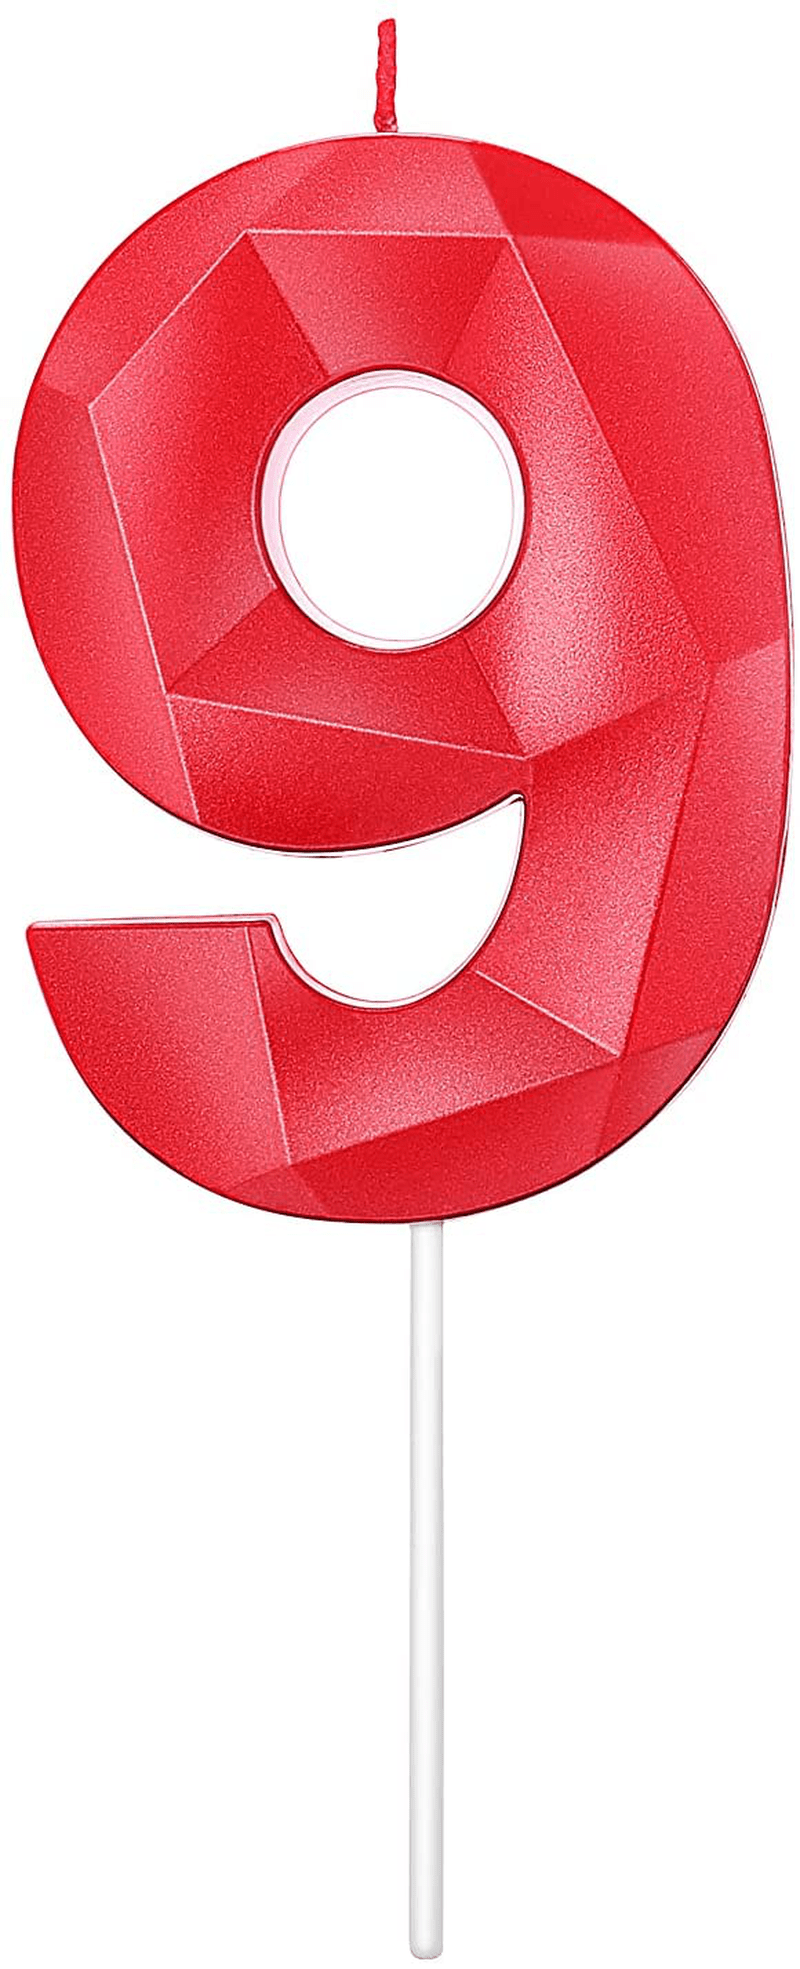 2.76 Inches 3D Diamond Shape Birthday Cake Candle Number 2 ,Red Color Happy Birthday Cake Cupcake Toppers Decoration for Wedding Anniversary,Party Celebration,Family Baking(RED Number 2) Home & Garden > Decor > Home Fragrances > Candles MEIMEI Red number 9 